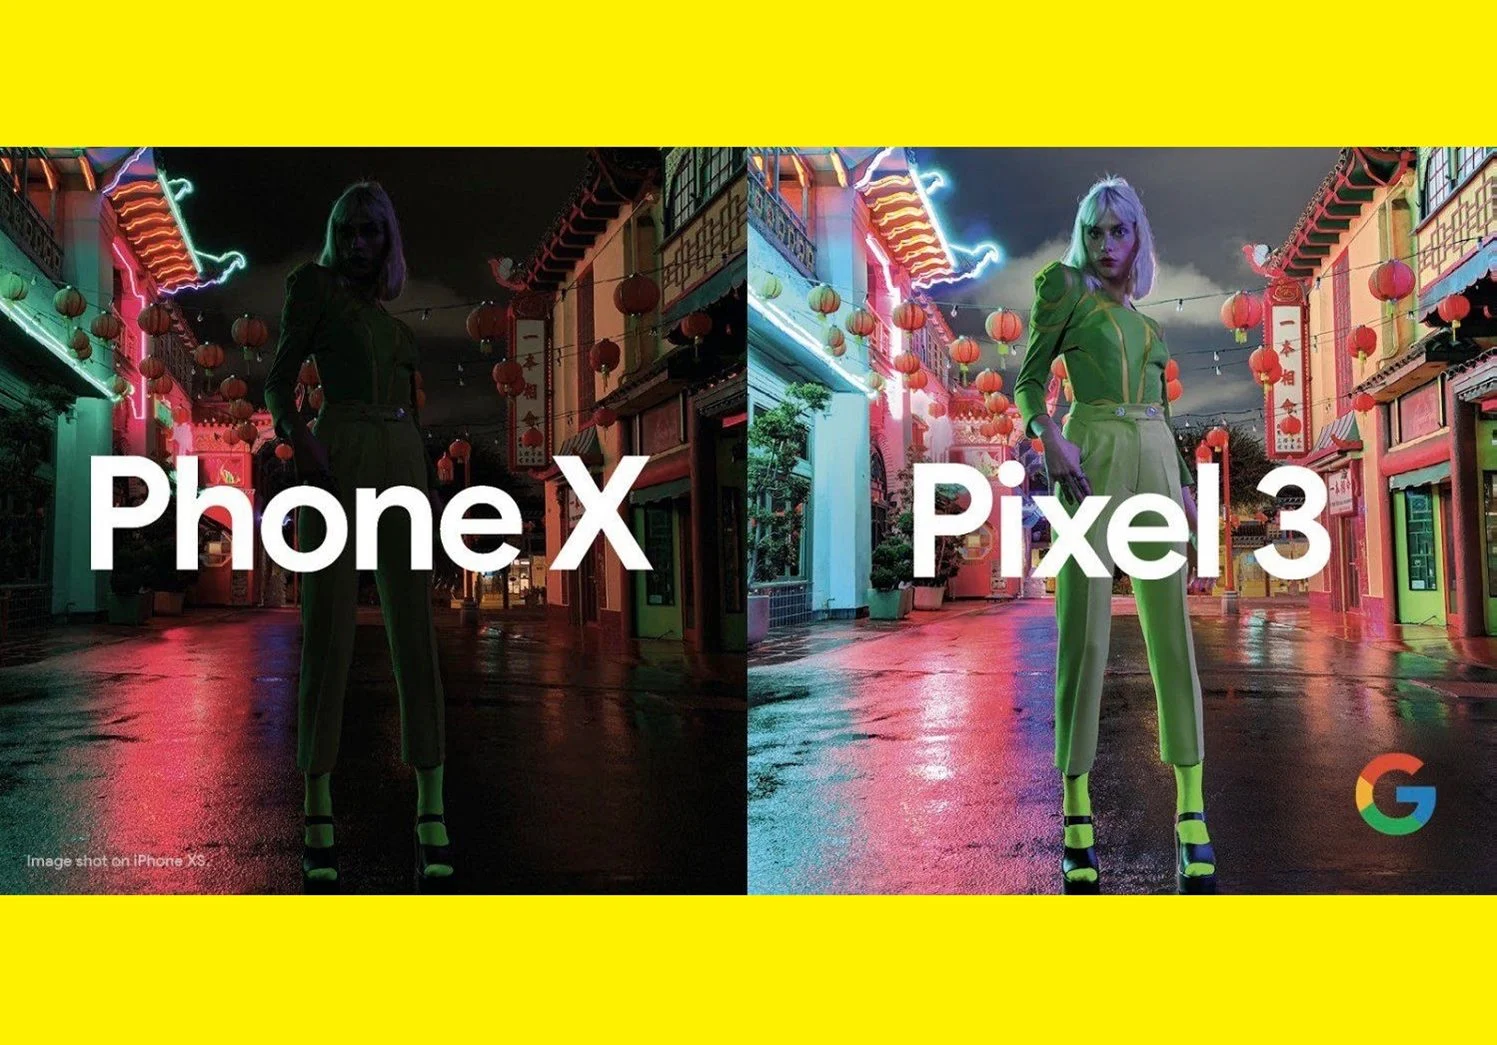 Google's Pixel 3 is apparently mocking iPhone users, boasting its Night vision effect